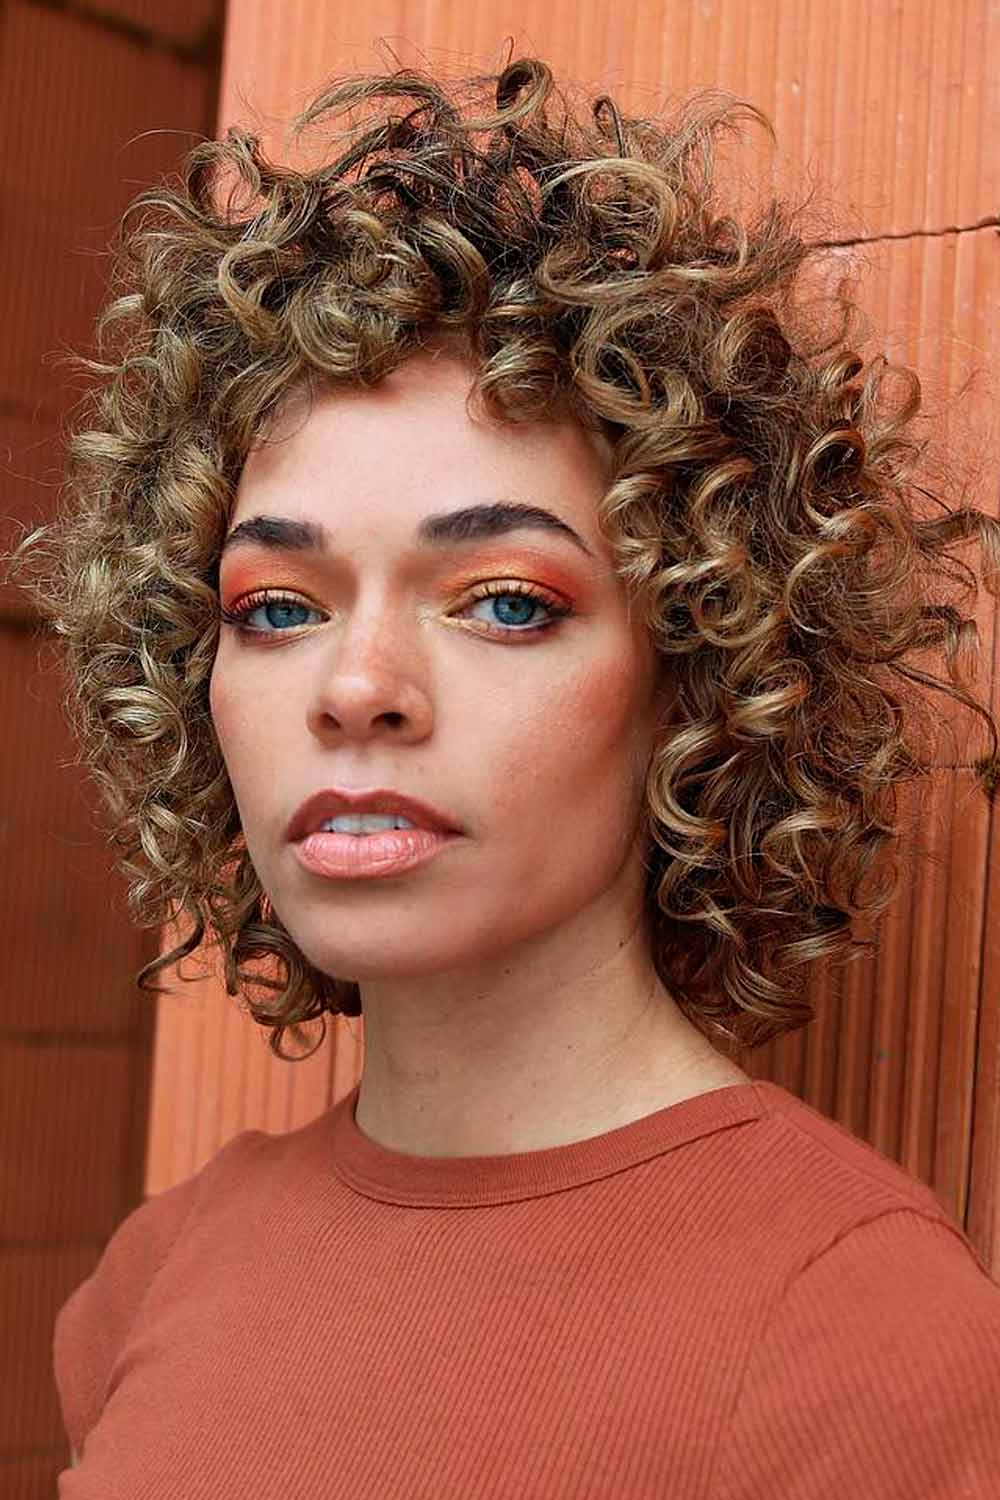 Short Curly Bob With Baby Bangs #curlybob #haircuts #bobhaircuts #curlyhairstyles